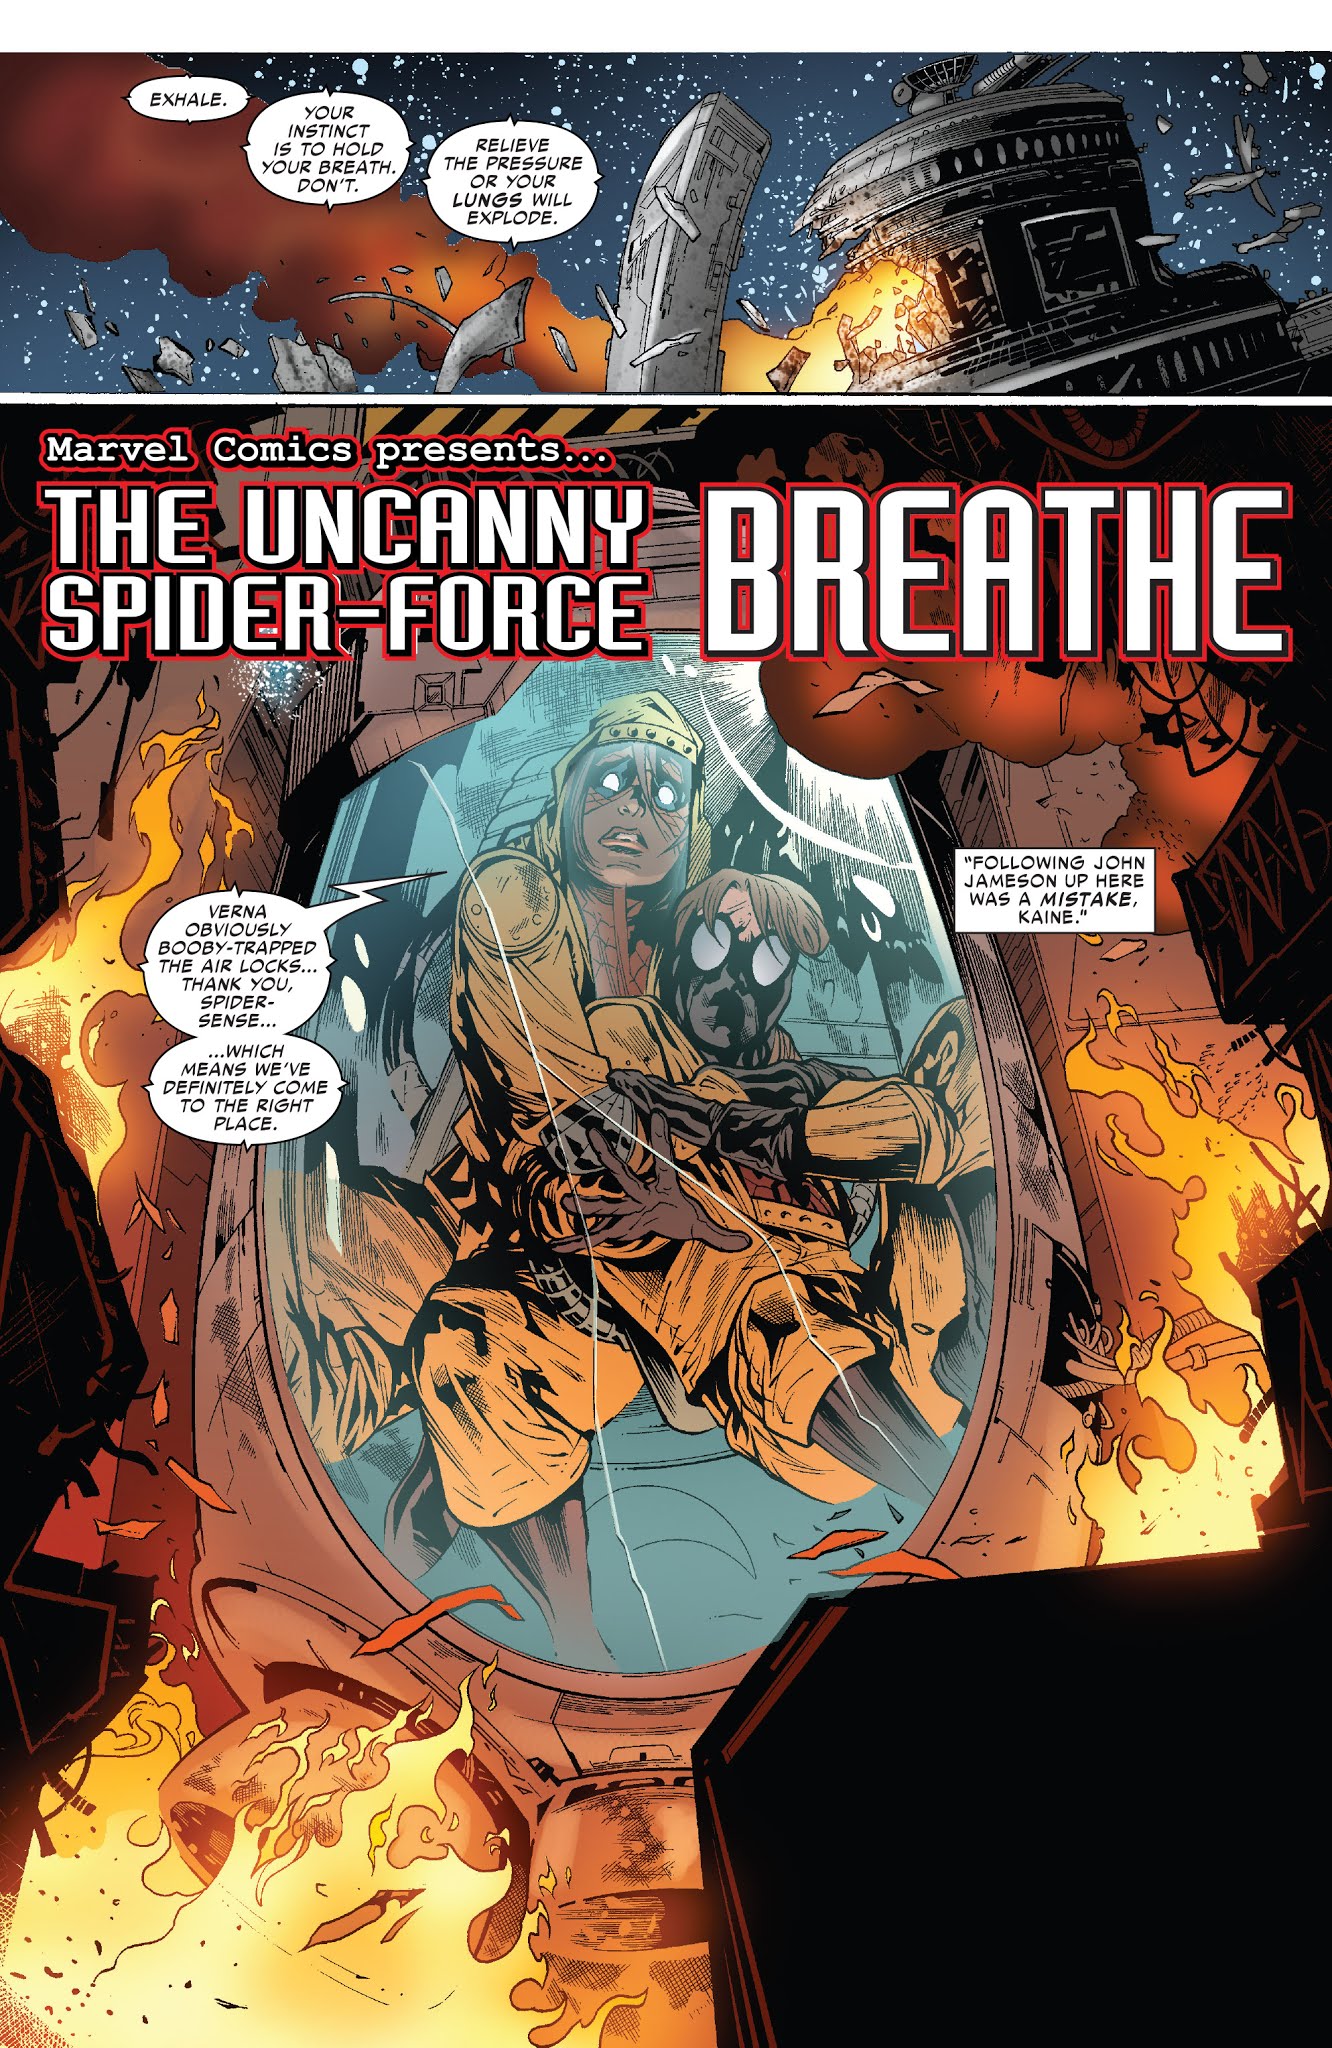 Read online Spider-Force comic -  Issue #3 - 6